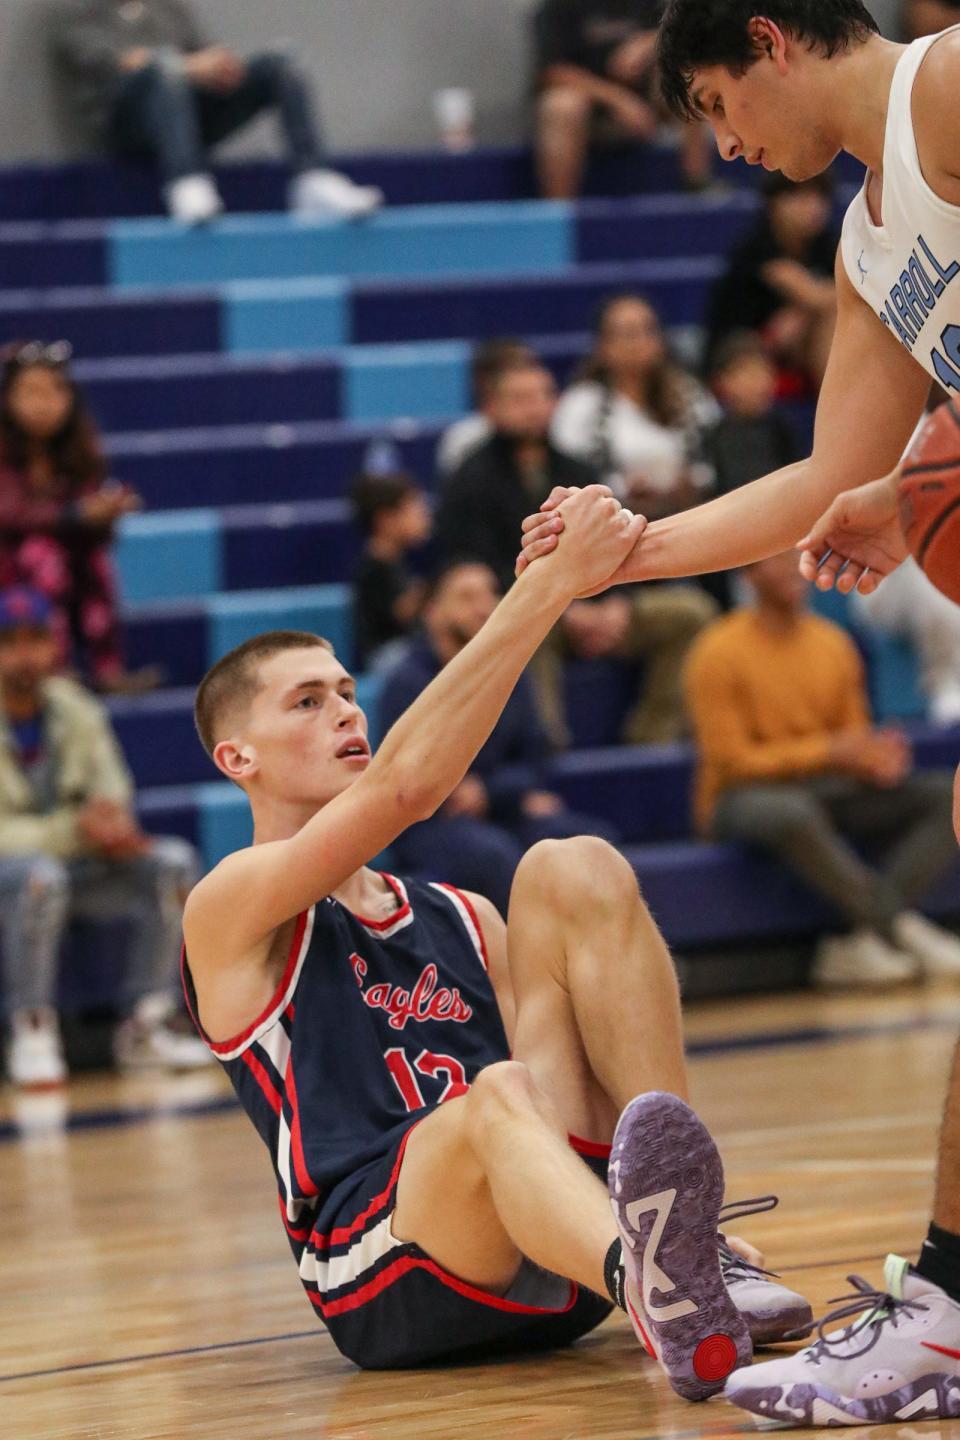 Carroll's Benny Hernandez helps Veterans Memorial's Dylan Cochran up at Carroll High School. The Eagles defeated the Tigers, 85-50, during the CCCA tournament on Dec. 2, 2022.